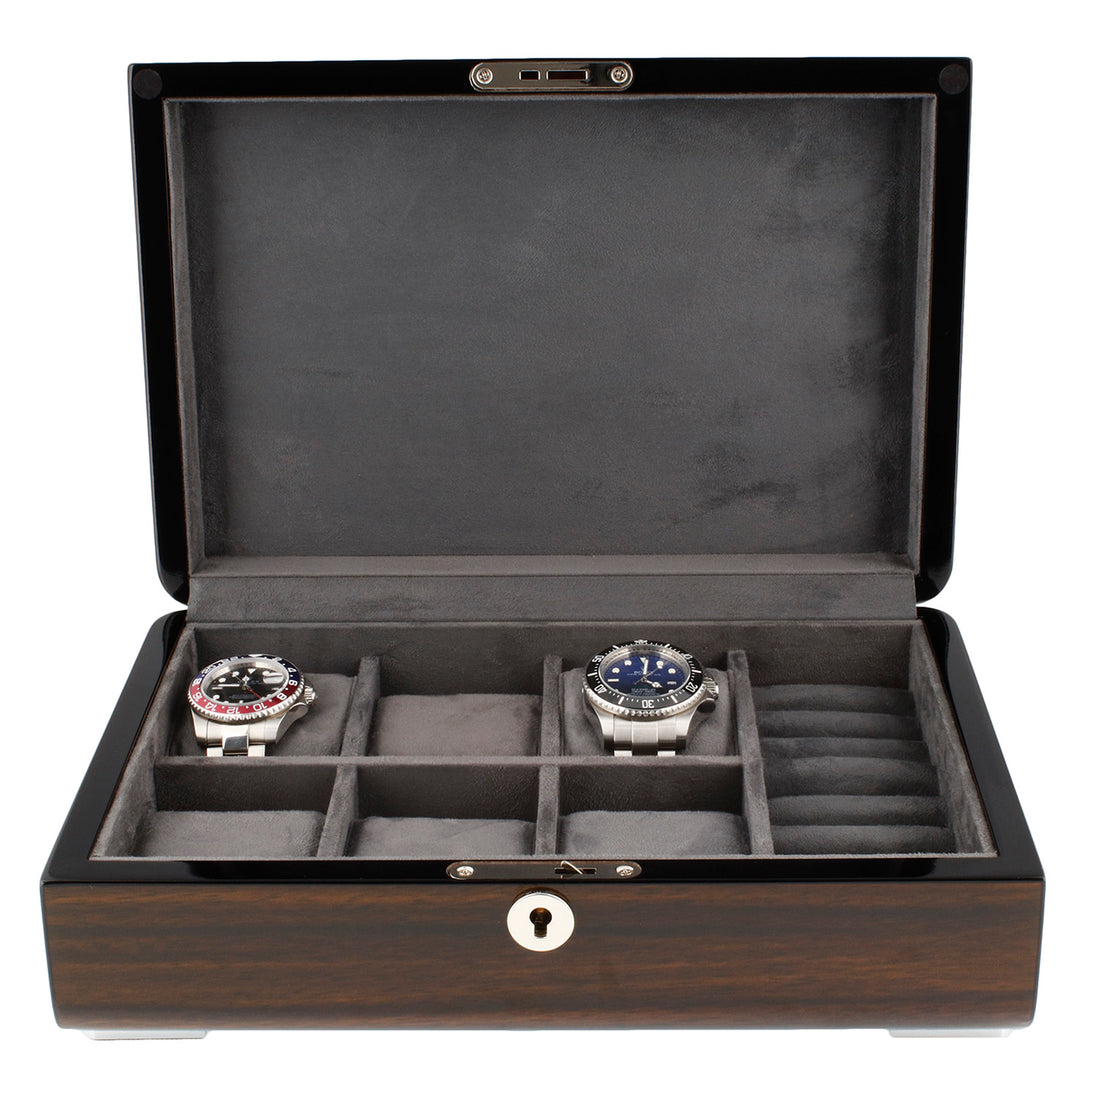 The Top Features to Look for in a Watch Box